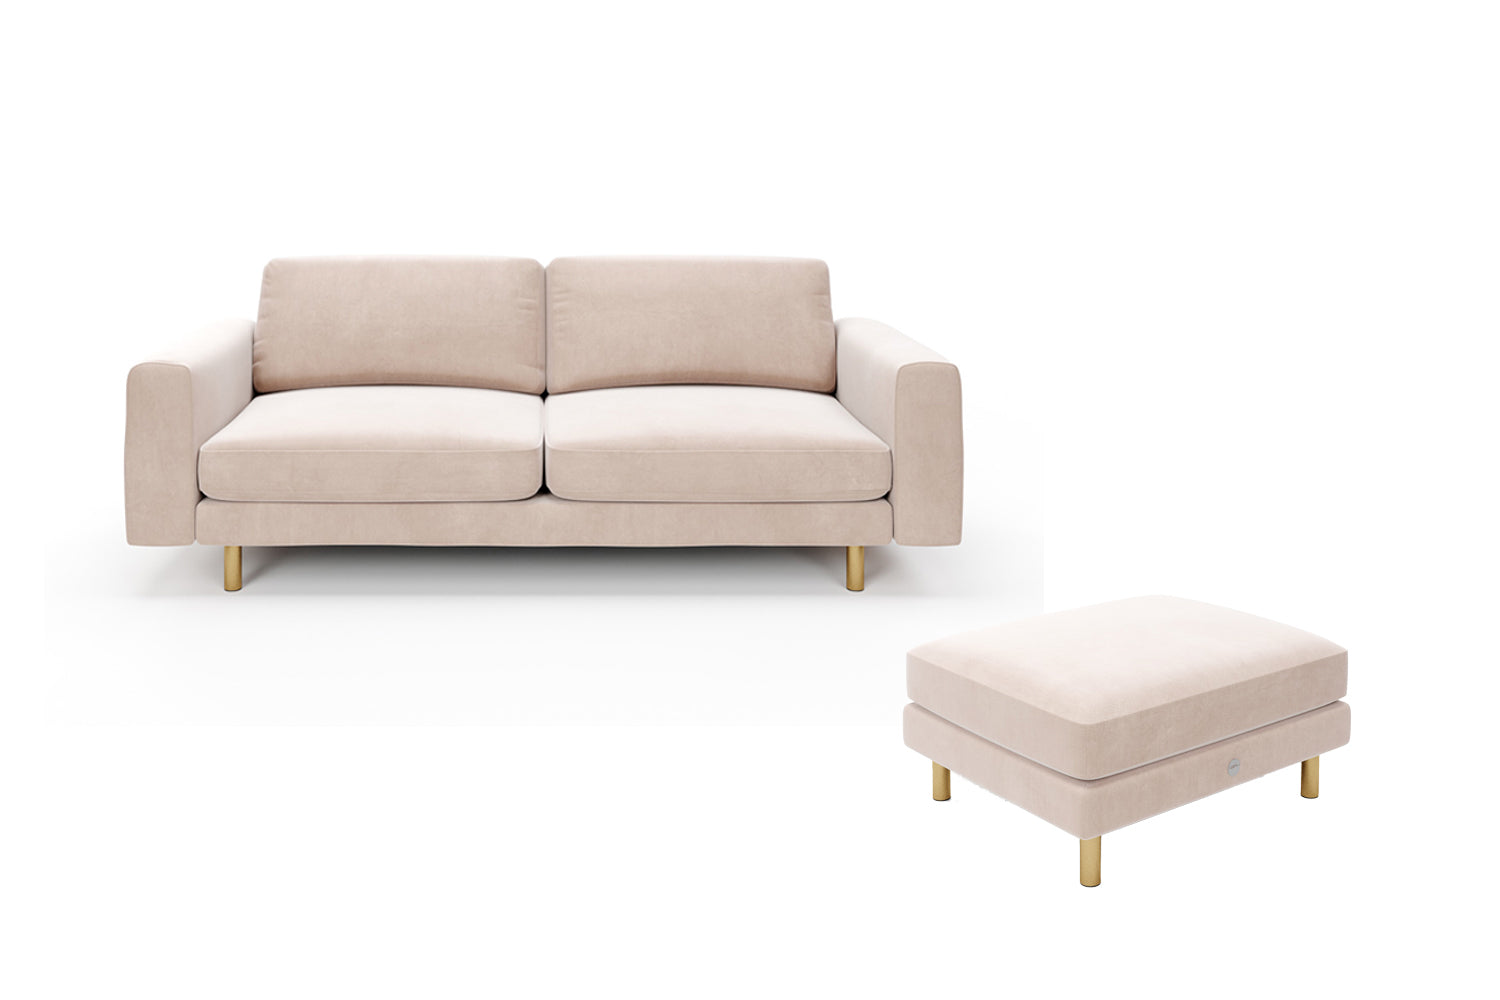 The Big Chill - 3 Seater Sofa and Footstool Set - Taupe